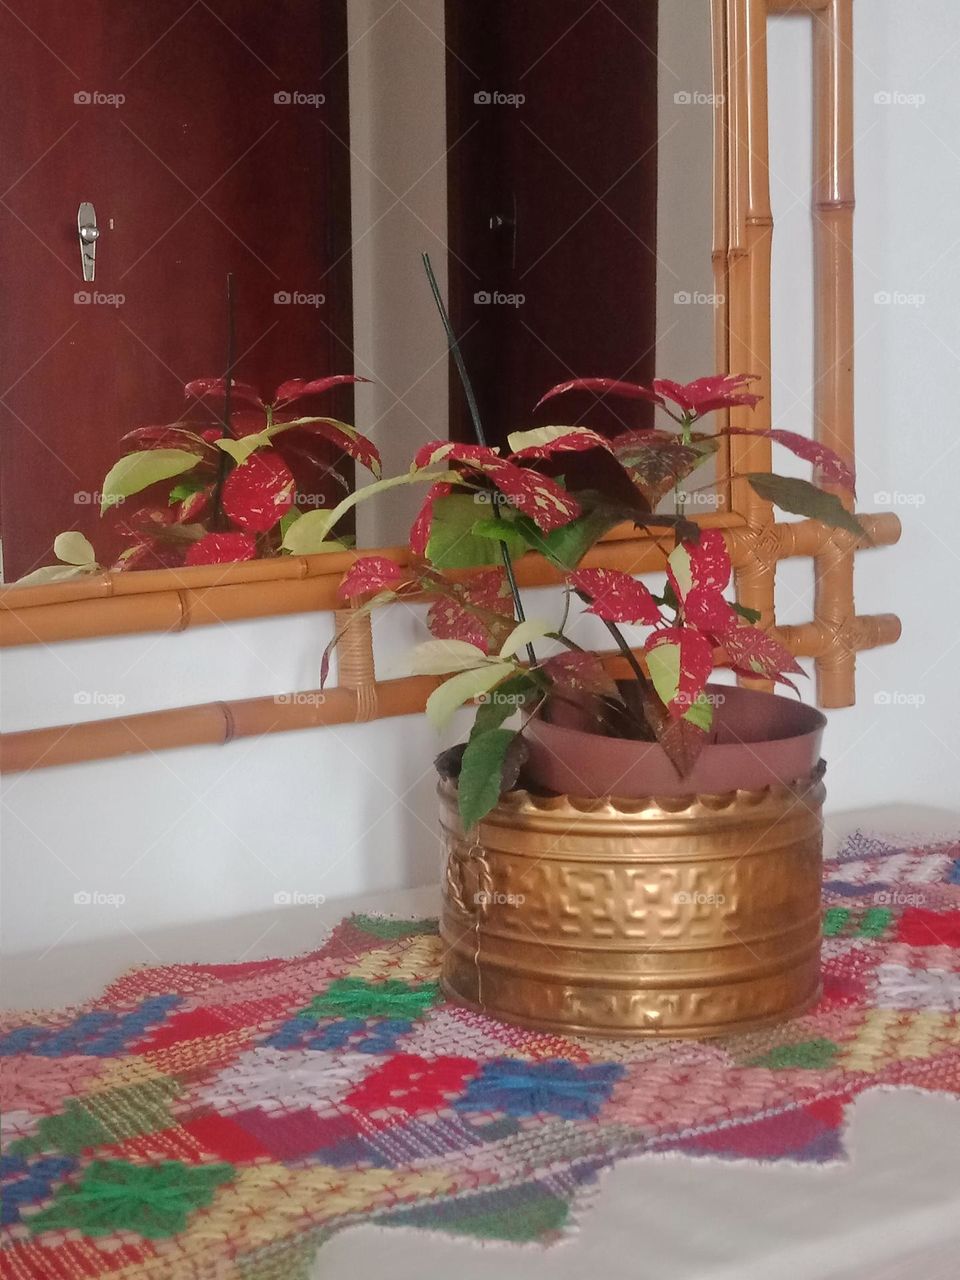 Hypoestes plant, looks like a flower, red leaves. Plant in a pot